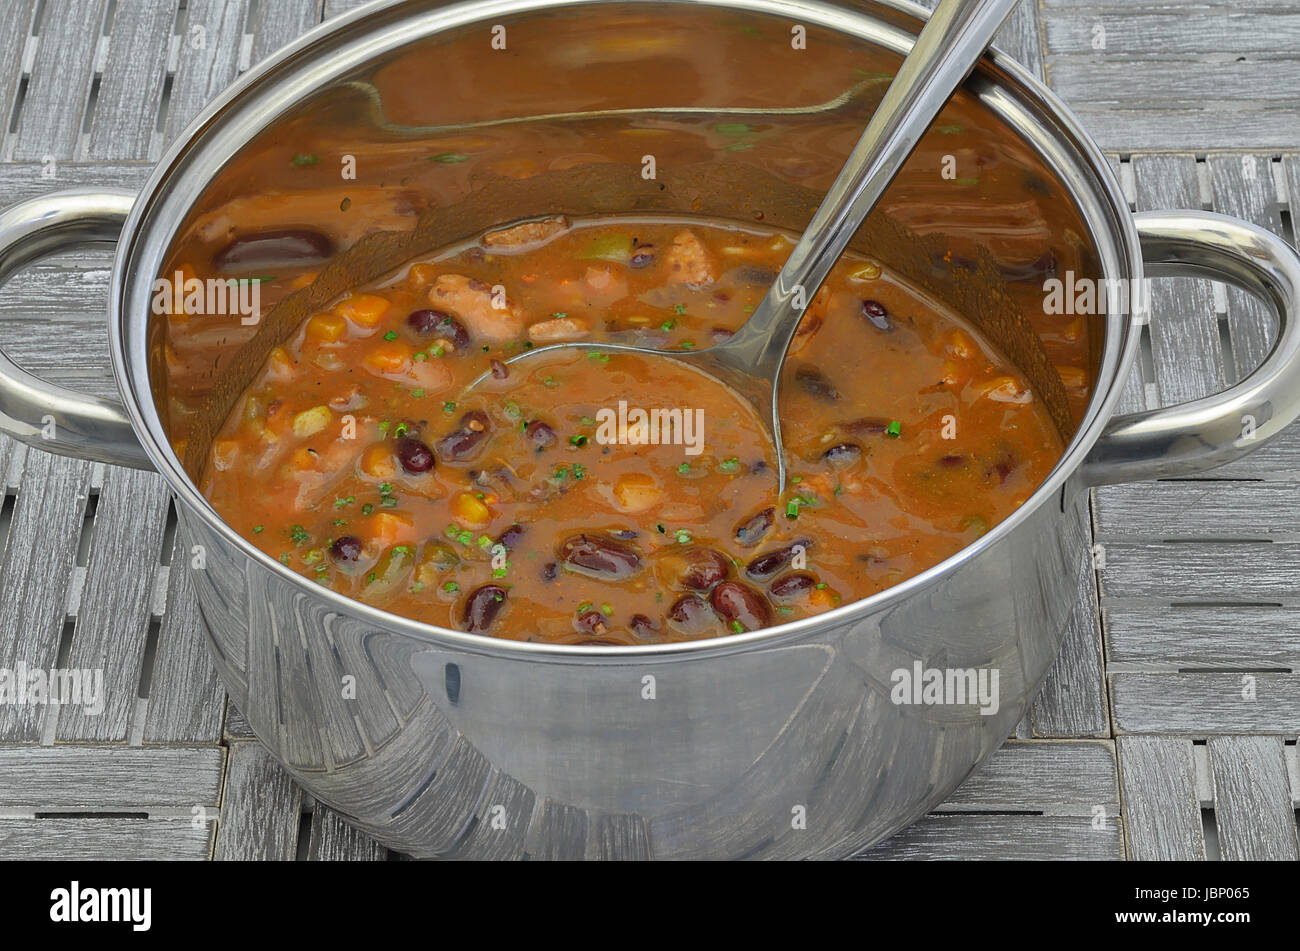 close up of a cooking pot with Chili con carne Stock Photo